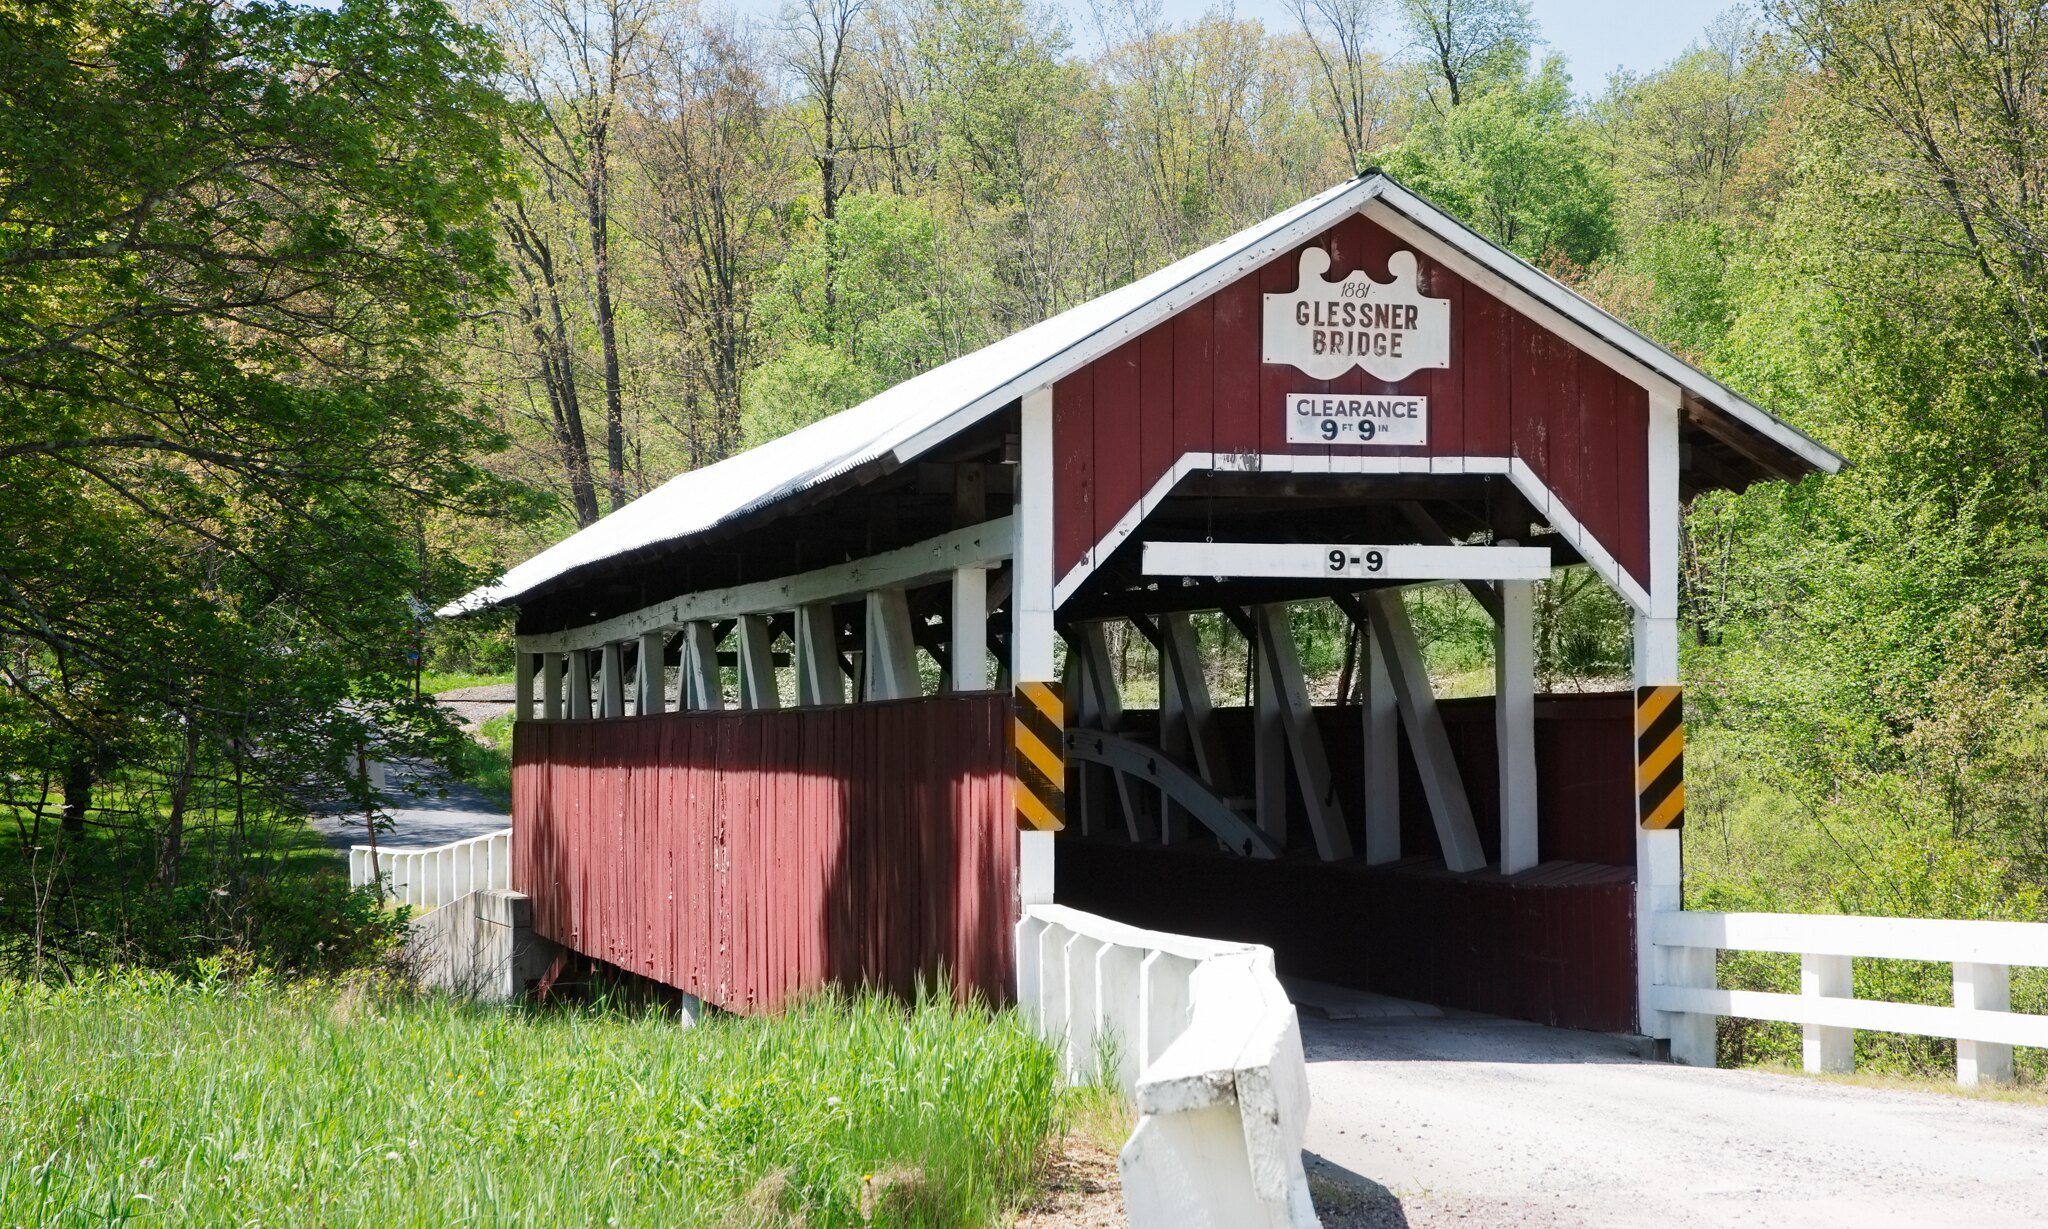  Glessner Covered Bridge in Shanksville, Somerset County, PA.  Buit in 1881. 